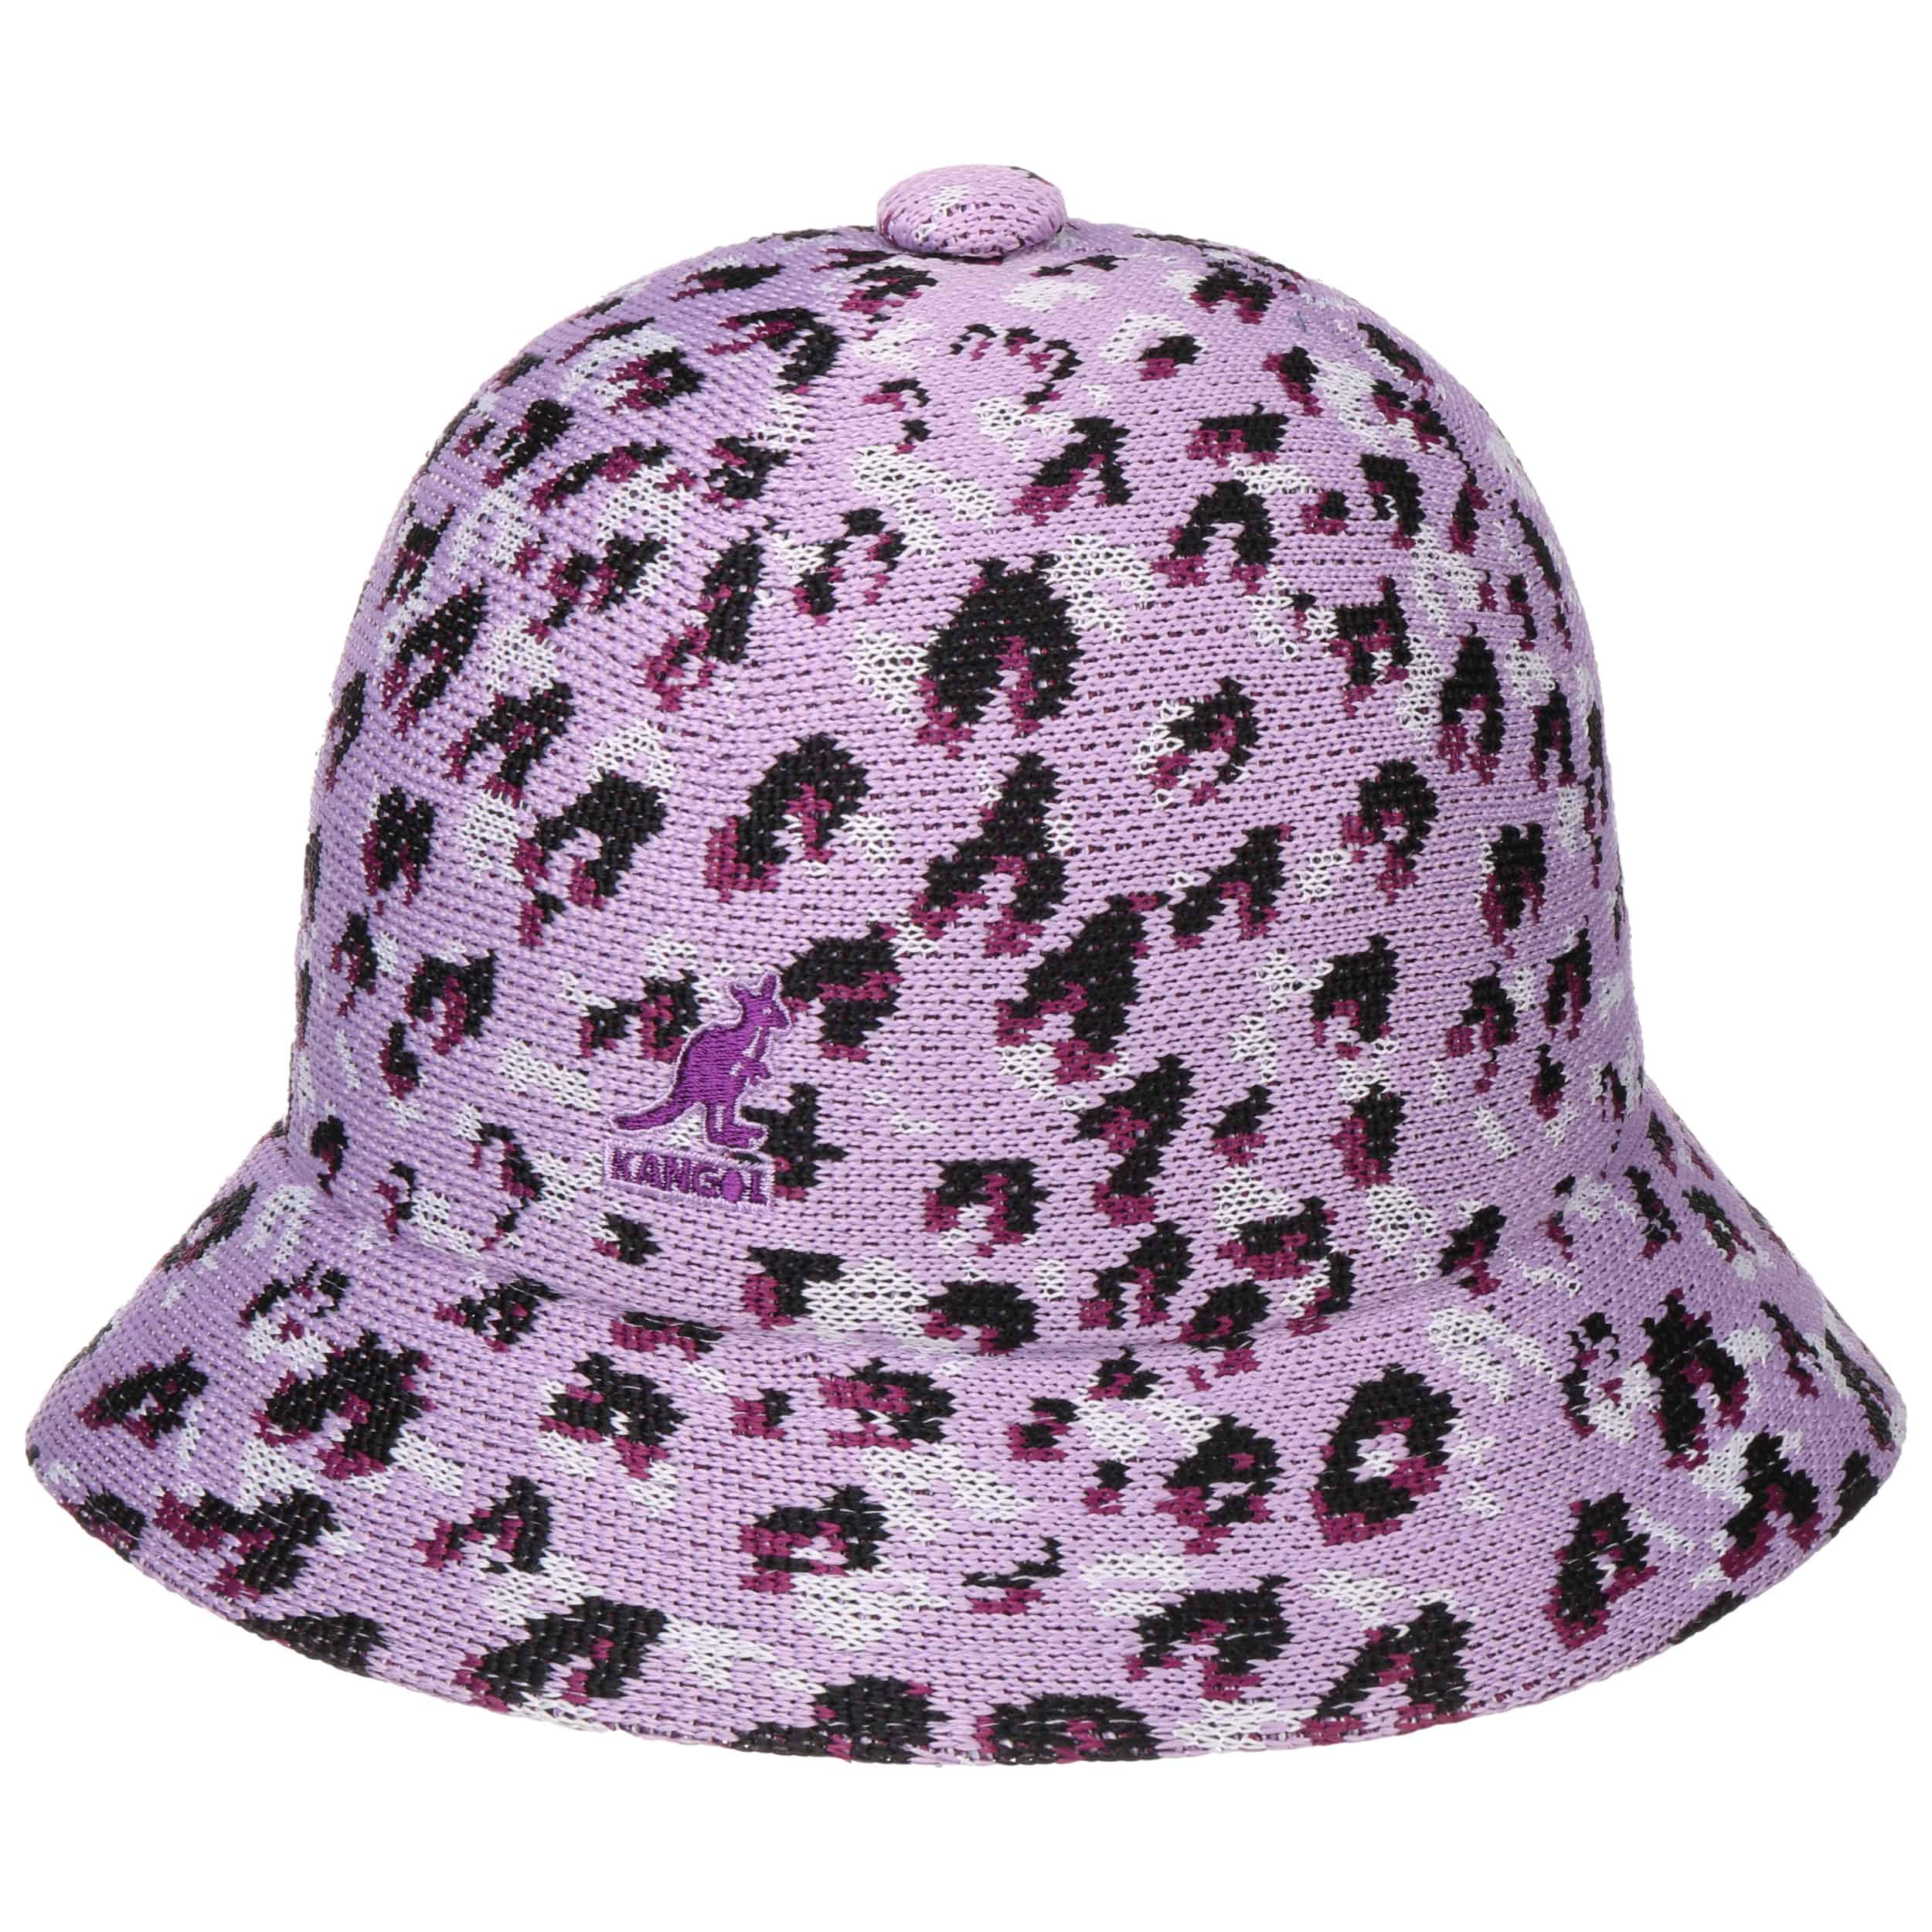 Carnival Casual Bucket Cloth Hat by Kangol